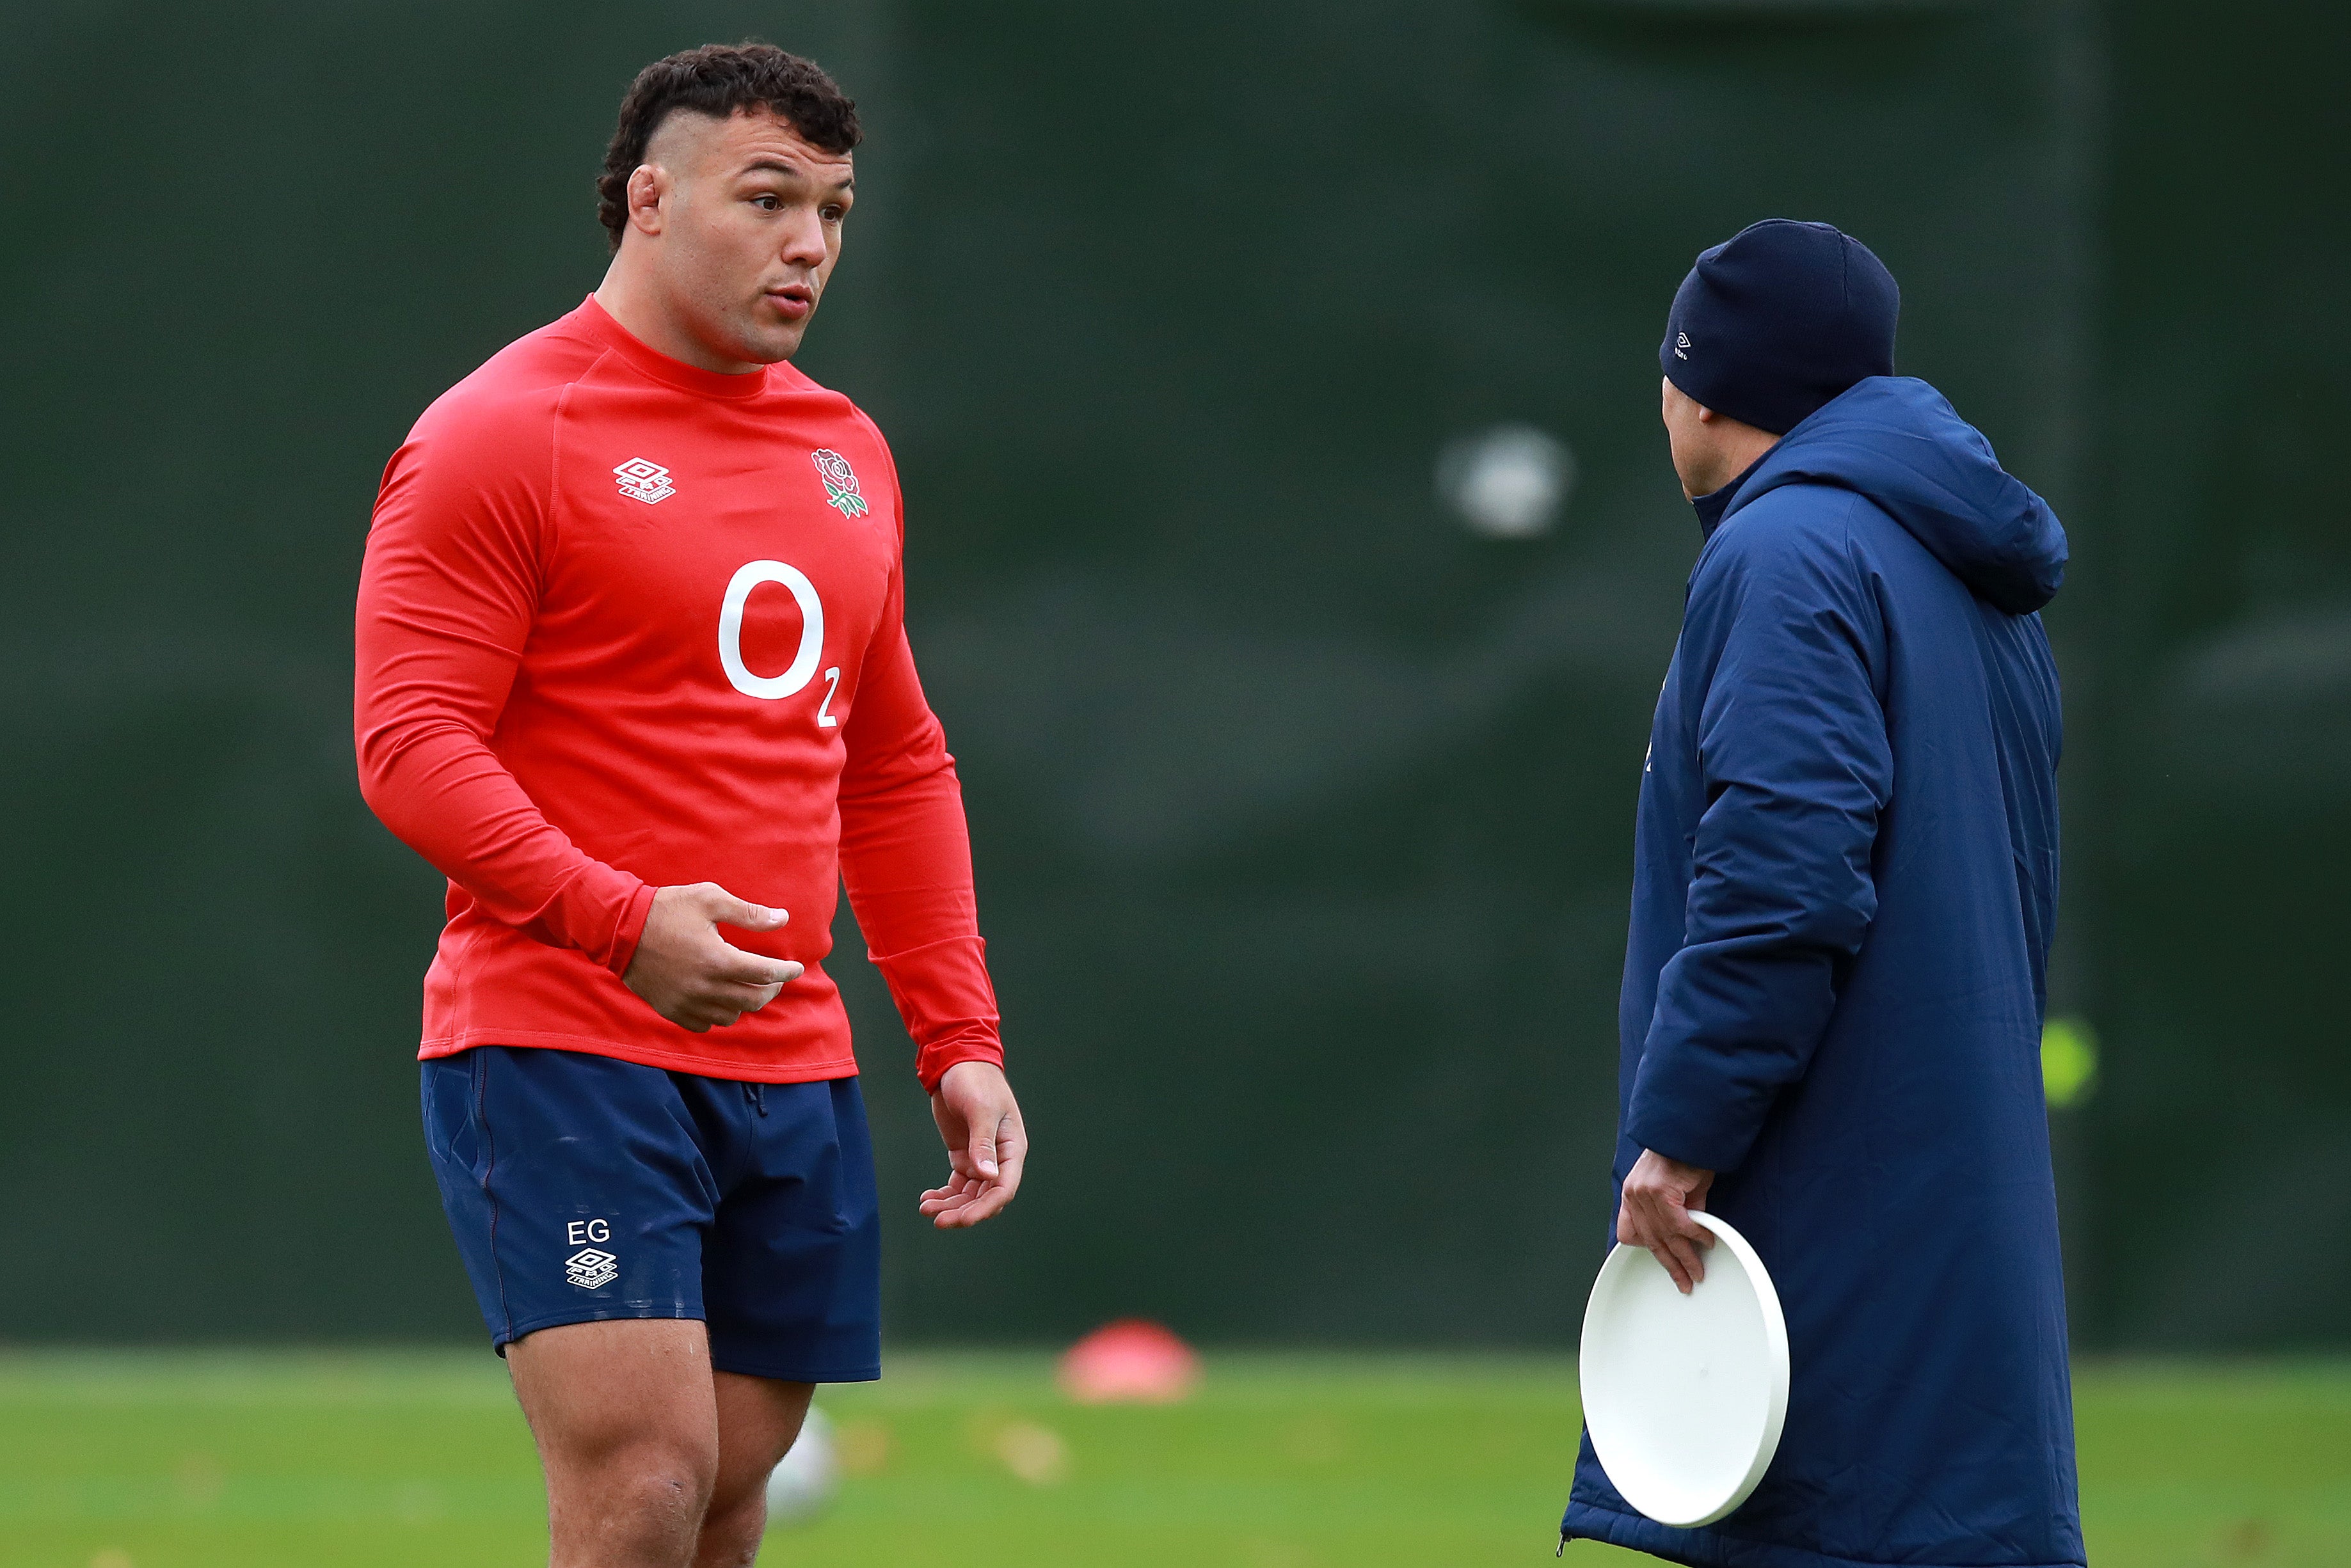 Ellis Genge believes player contracts must be modernised to helps rugby union keep up with the times